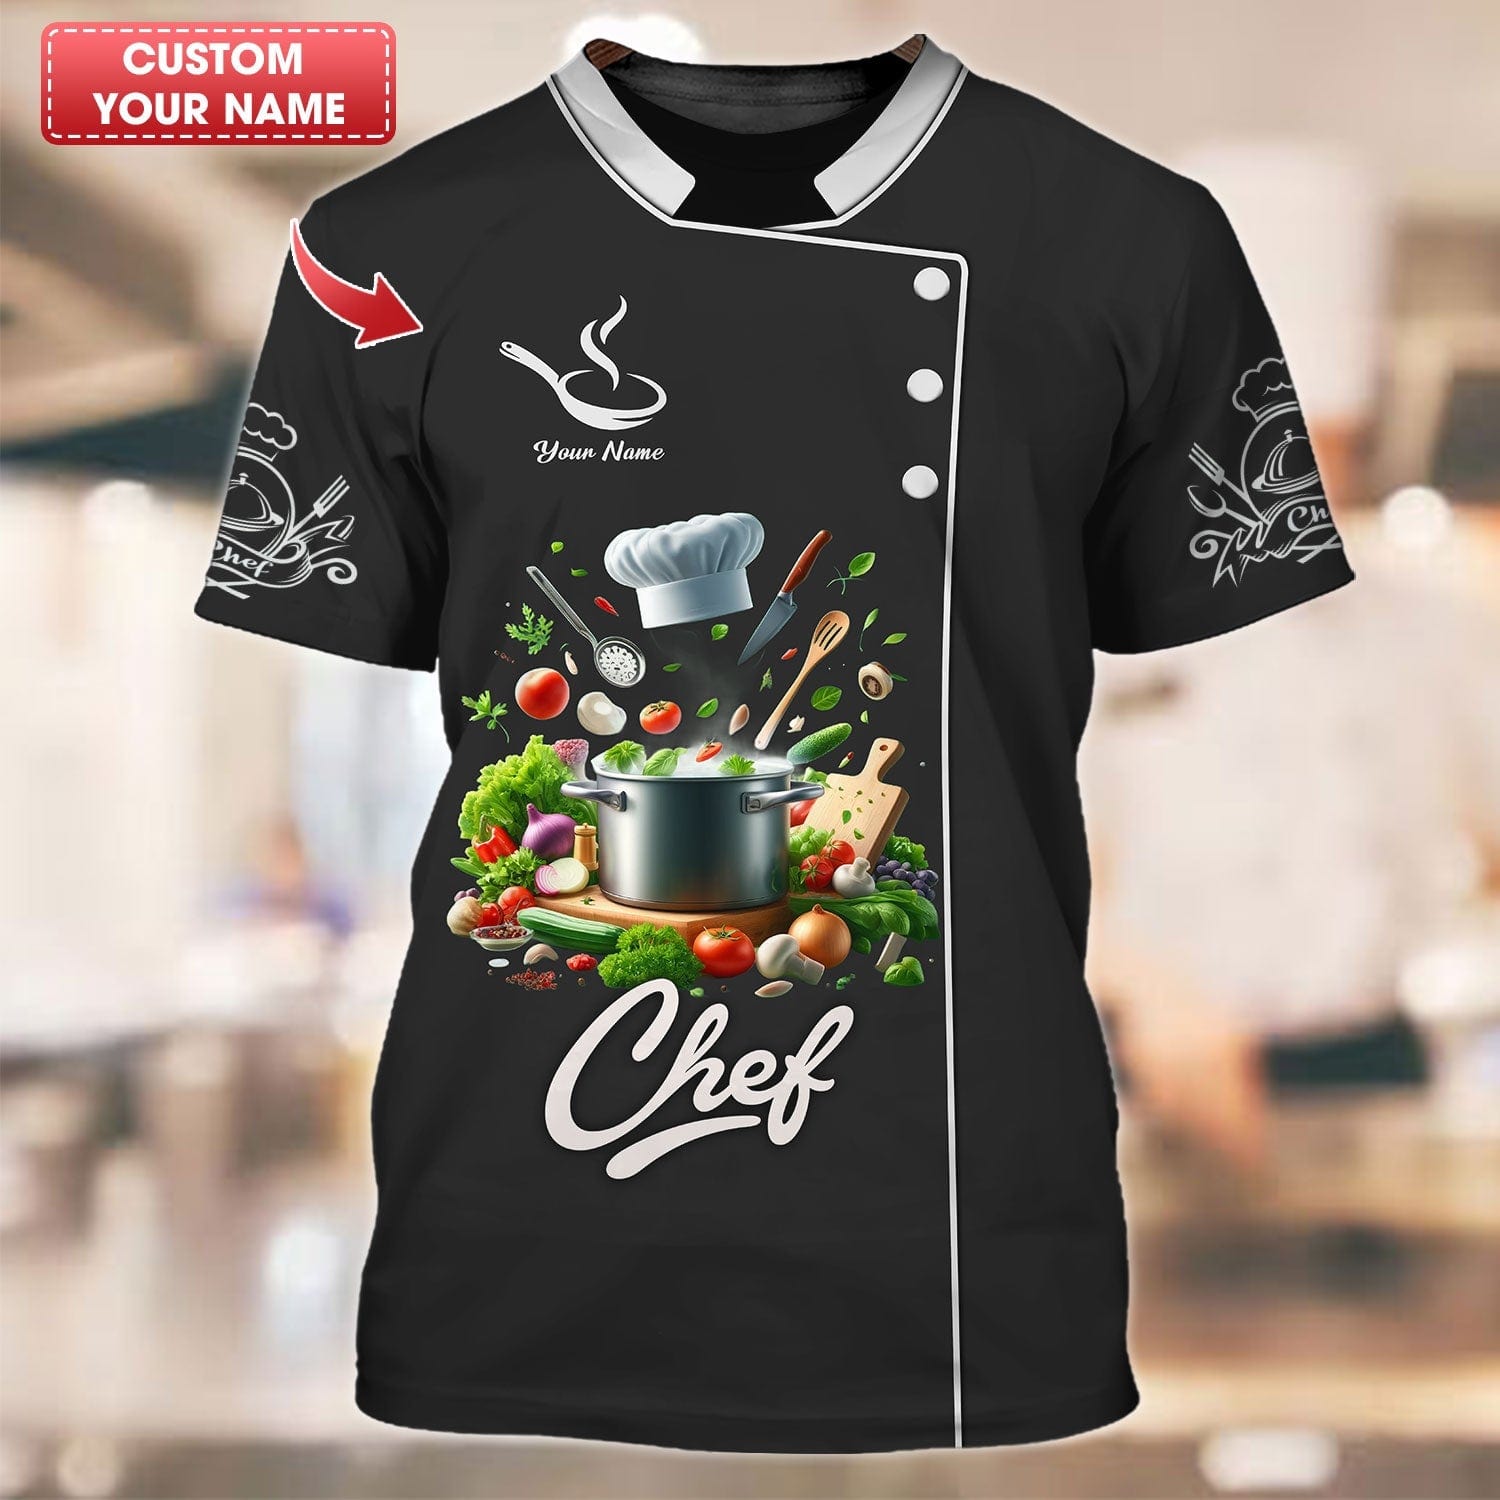 Personalized Chef Shirt - Premium Ingredients Circle Pot Design for Culinary Masters